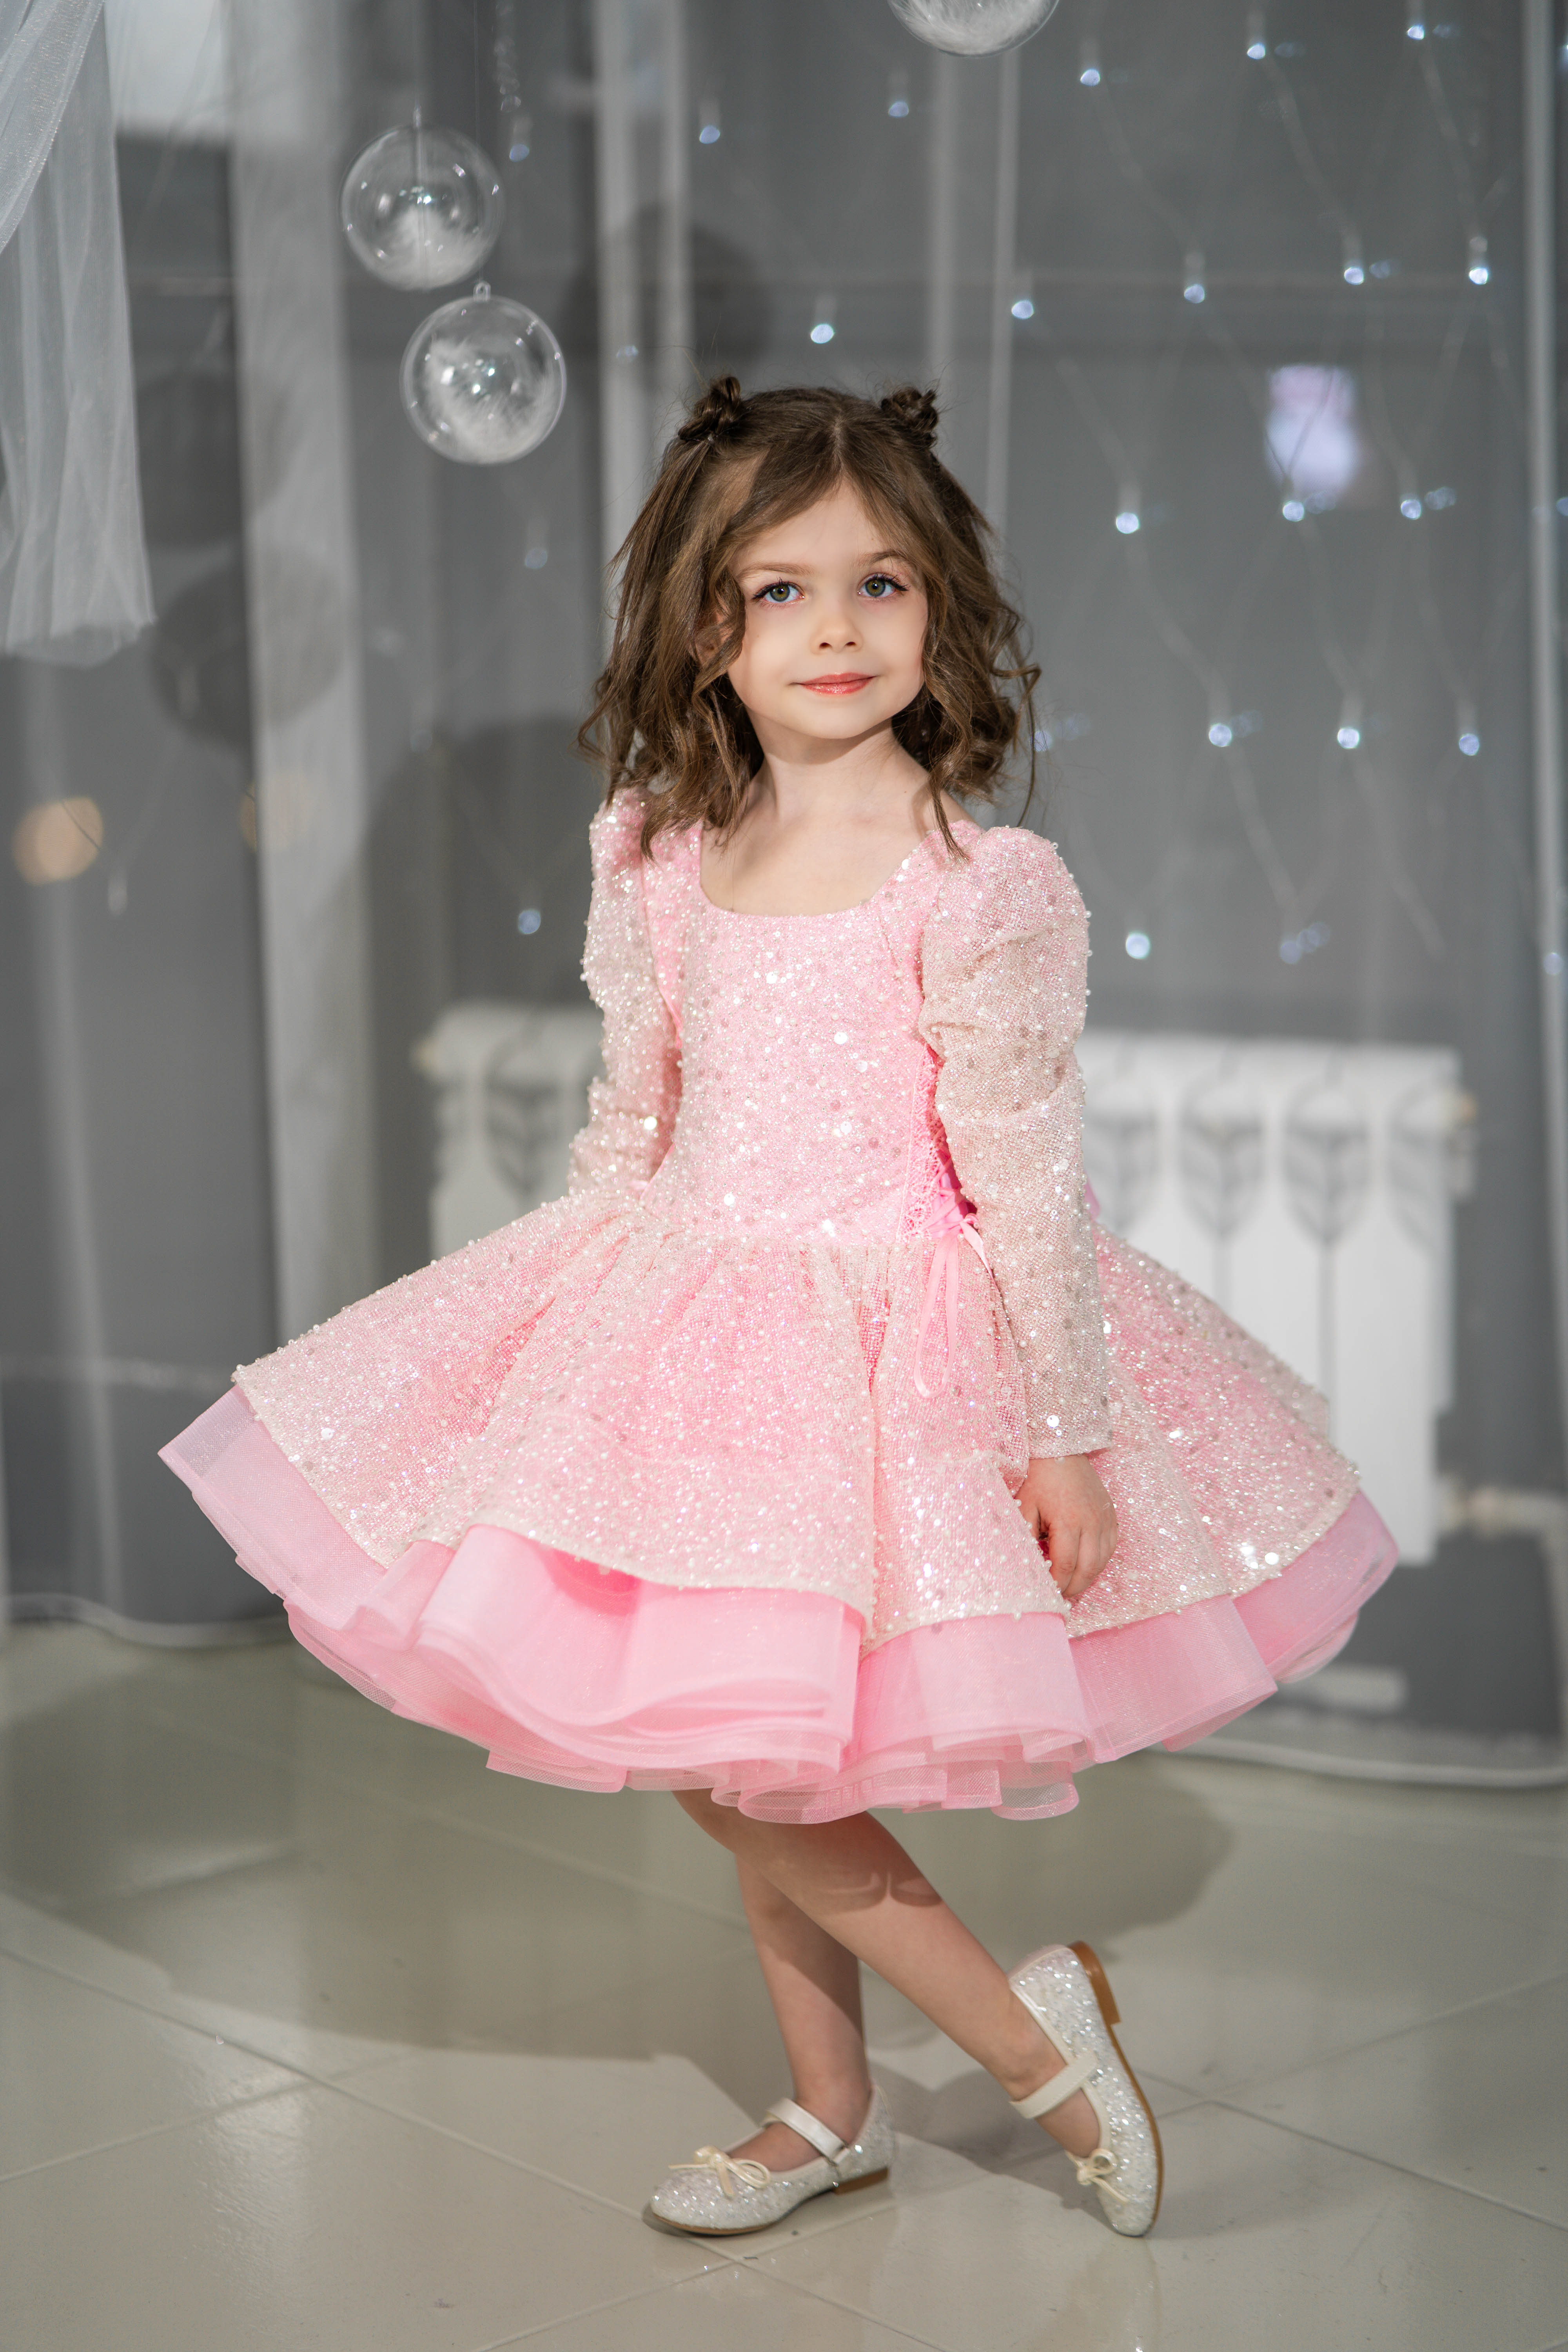 Princess Dress (Size 4-5/Pink/ 1 In Stock)